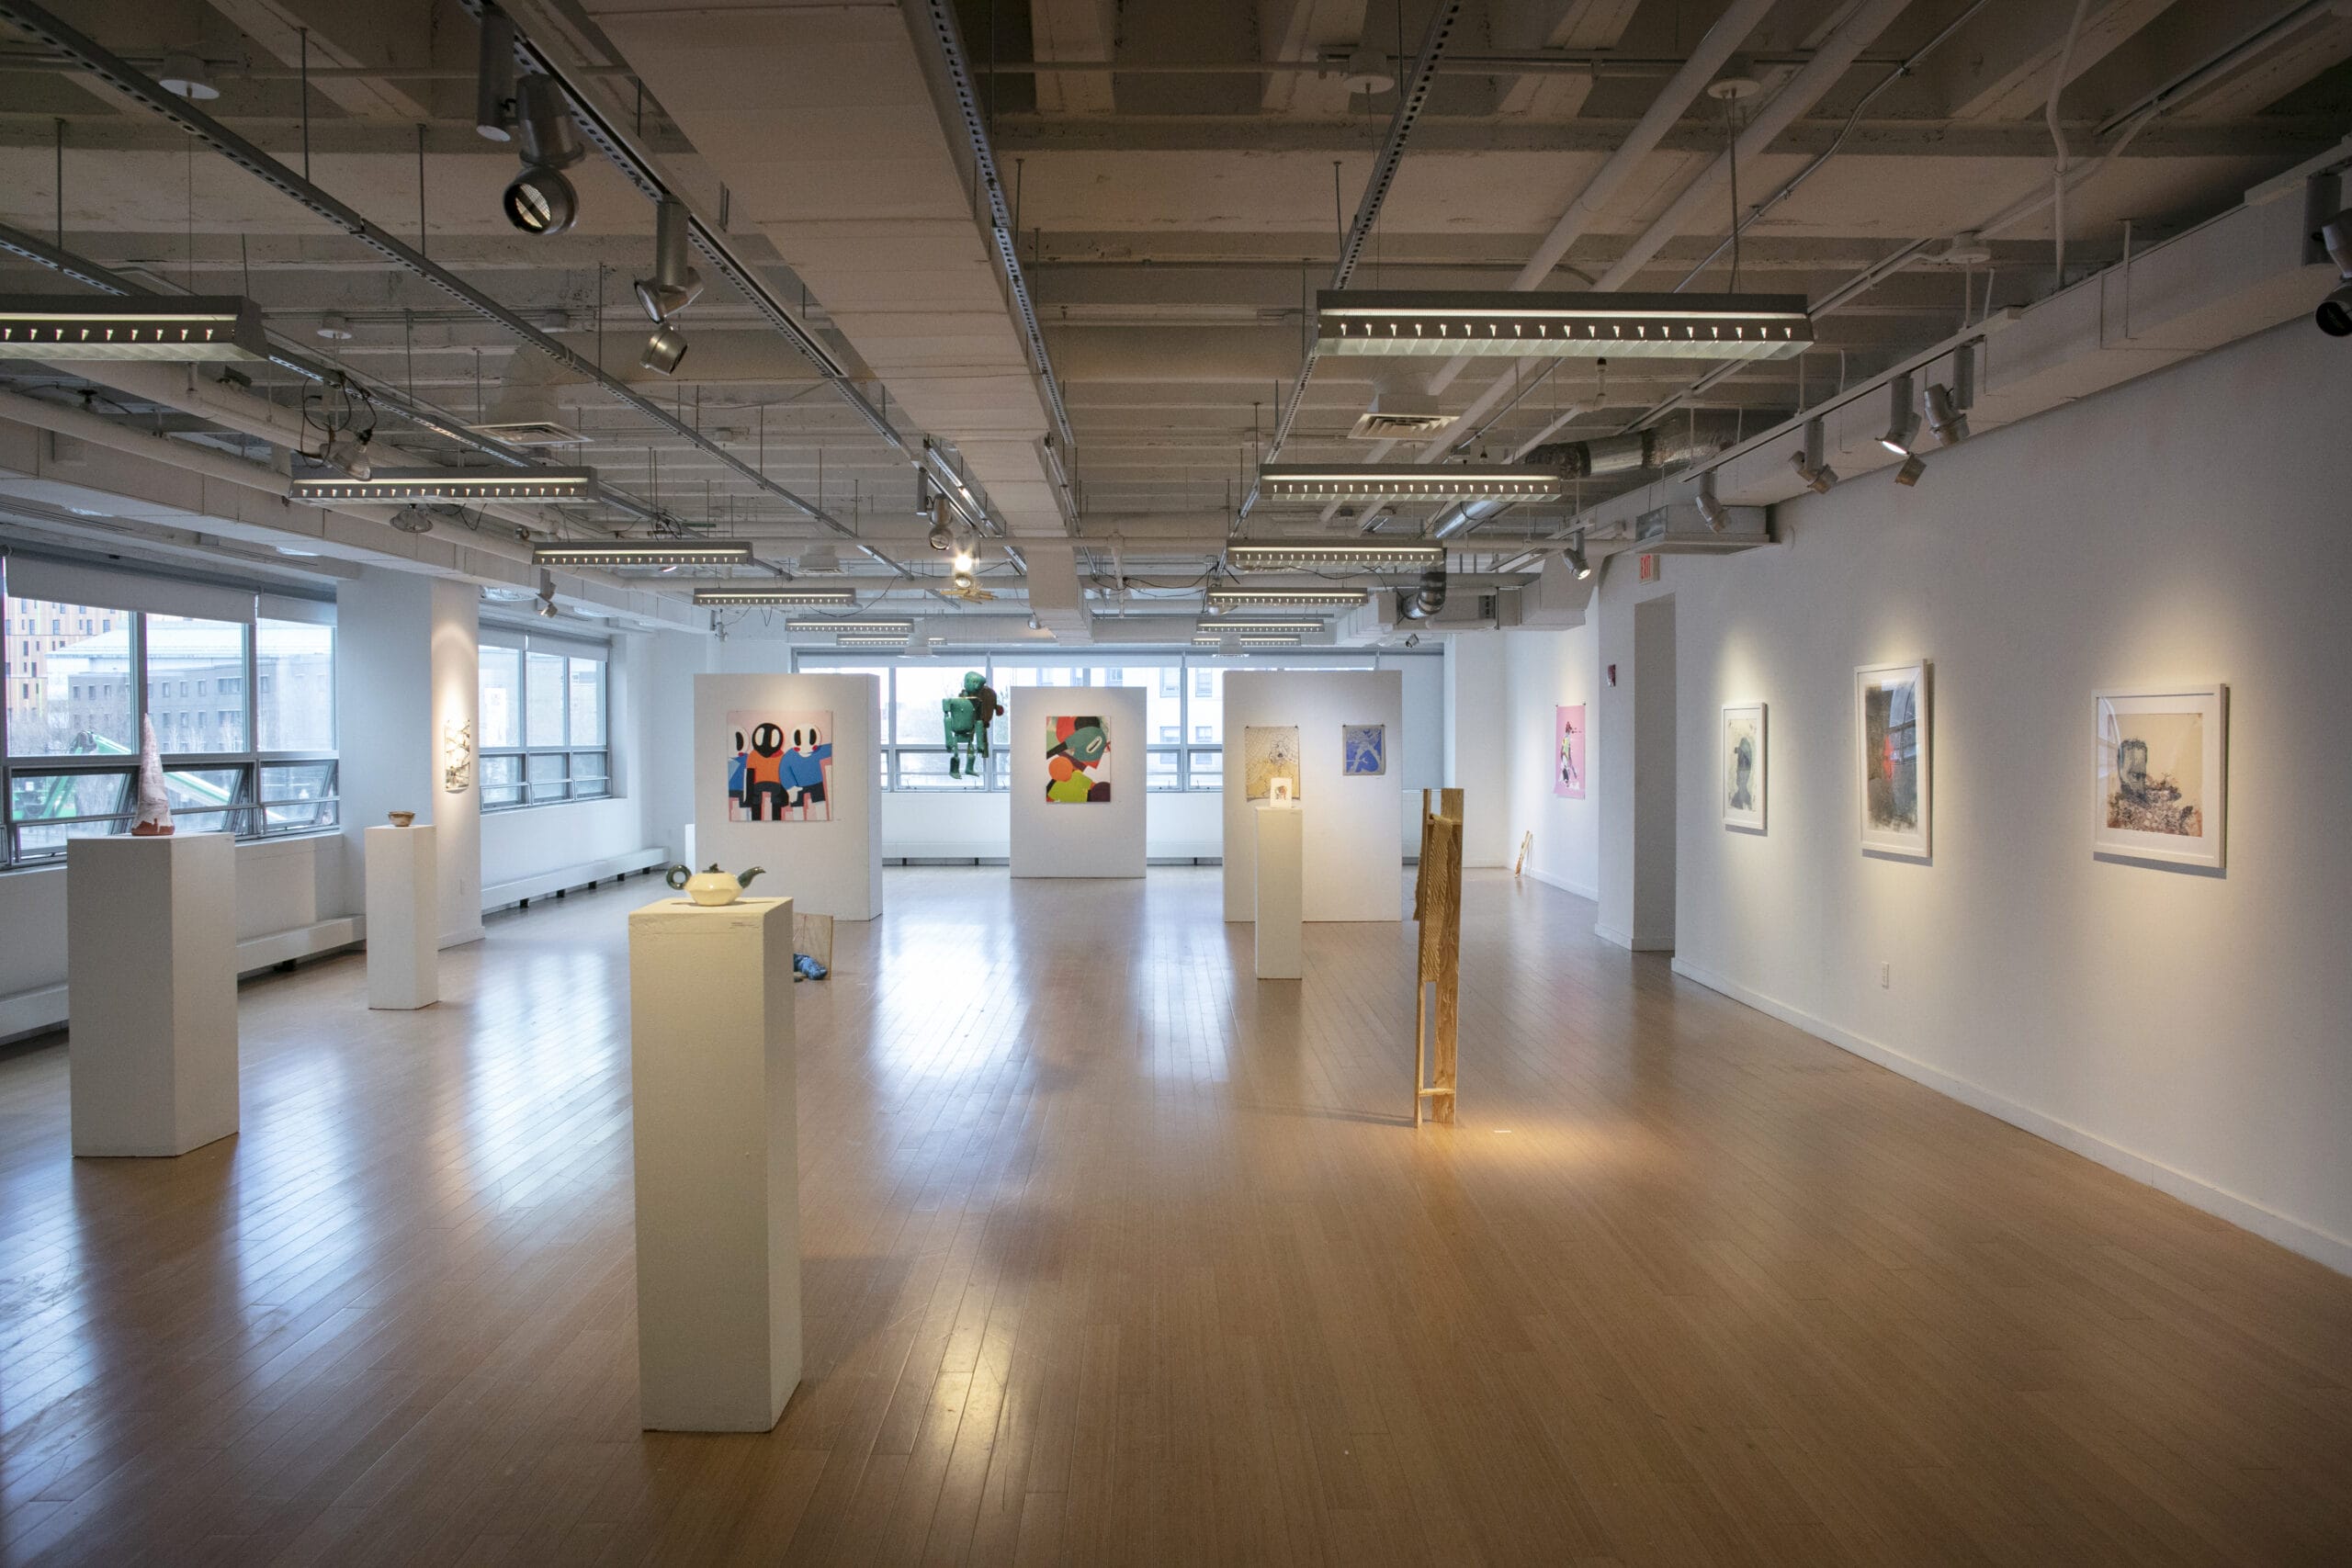 A large gallery with pedestals and artwork.